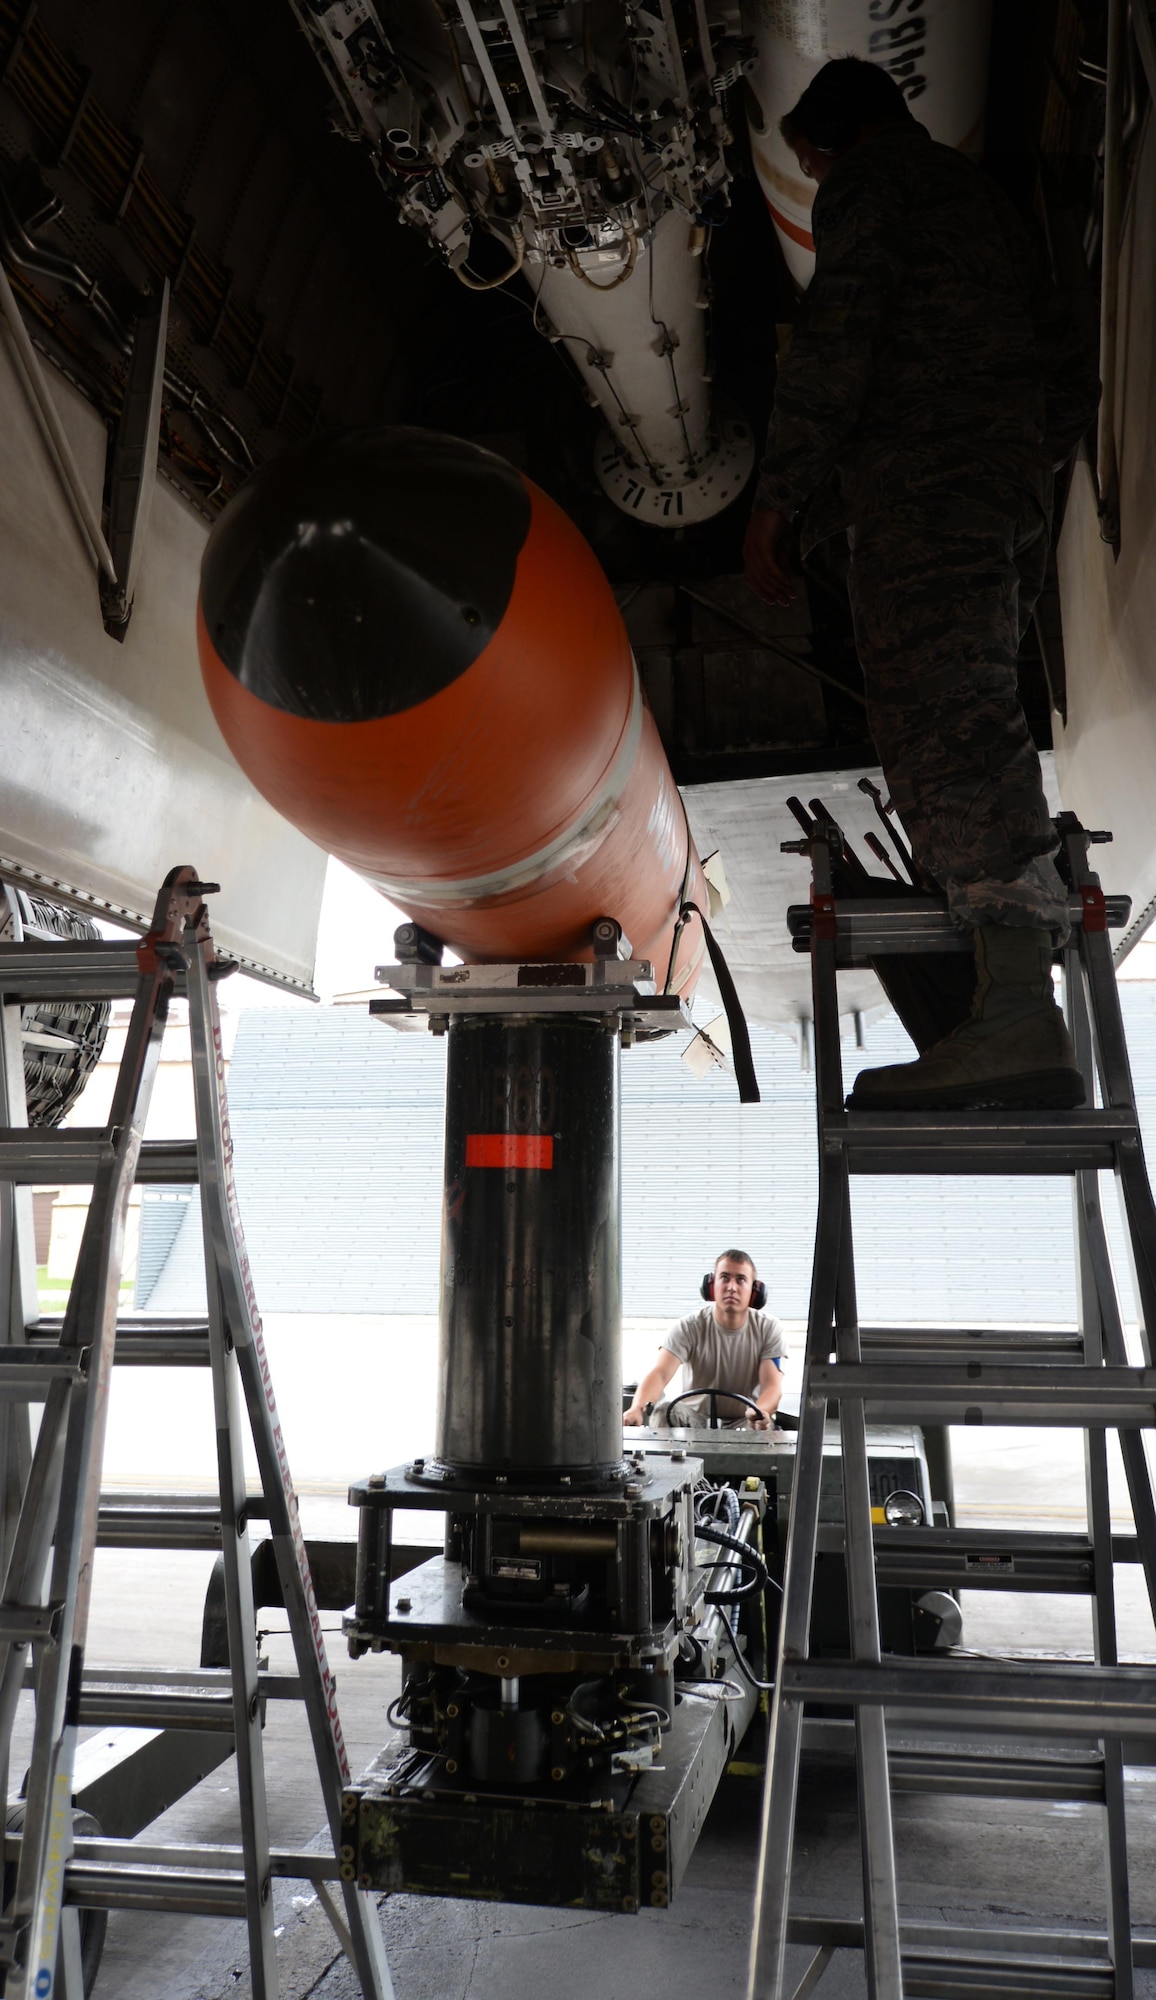 Airman 1st Class Trenton Anderson, 28th Munitions Squadron load crew member, loads an Mk-65 Quick Strike mine munitions into a B-1 bomber during a joint mission exercise at Ellsworth Air Force Base, S.D., June 3, 2014. Airmen and Sailors enhanced their skills by cooperatively assembling the different munition types. (U.S. Air Force photo by Airman 1st Class Rebecca Imwalle/Released)